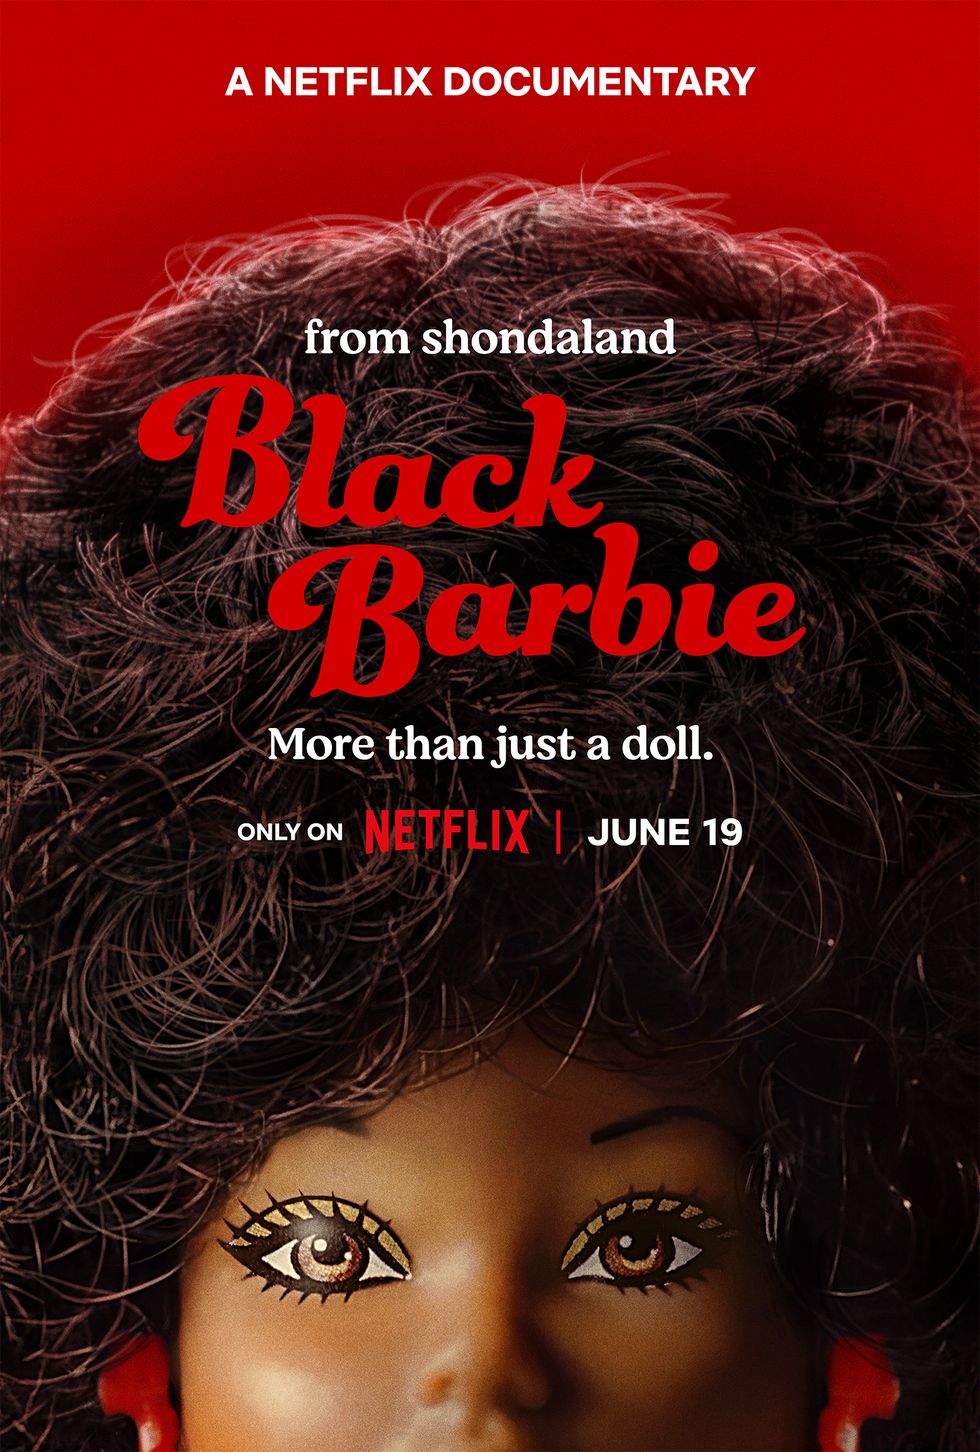 the poster for 'black barbie,' coming soon from shondaland and netflix